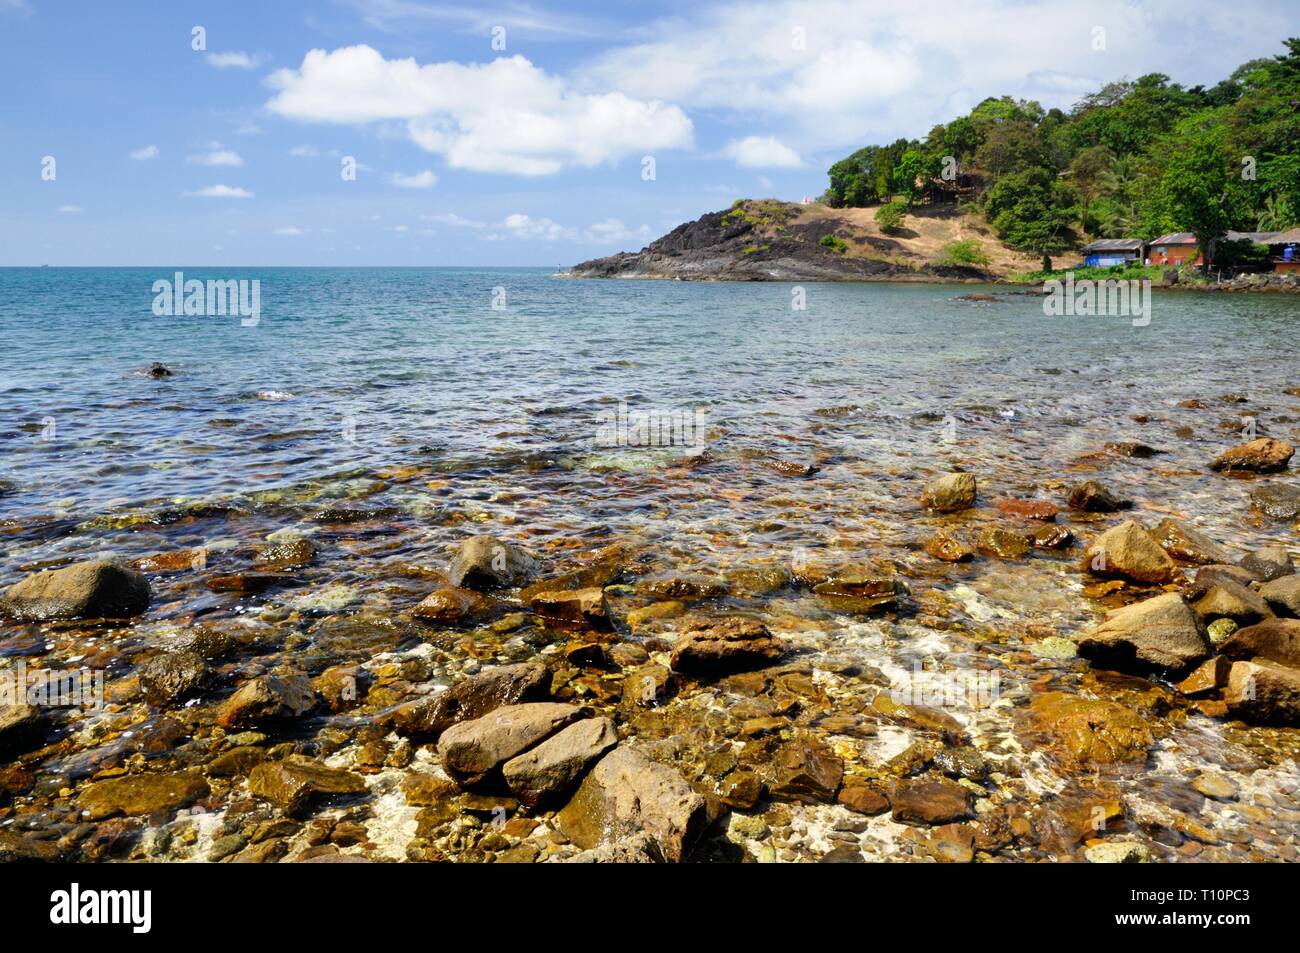 Volcanic rock beach and tourist resort at the coastline of the tropical Koh Chang Island, Thailand. Stock Photo